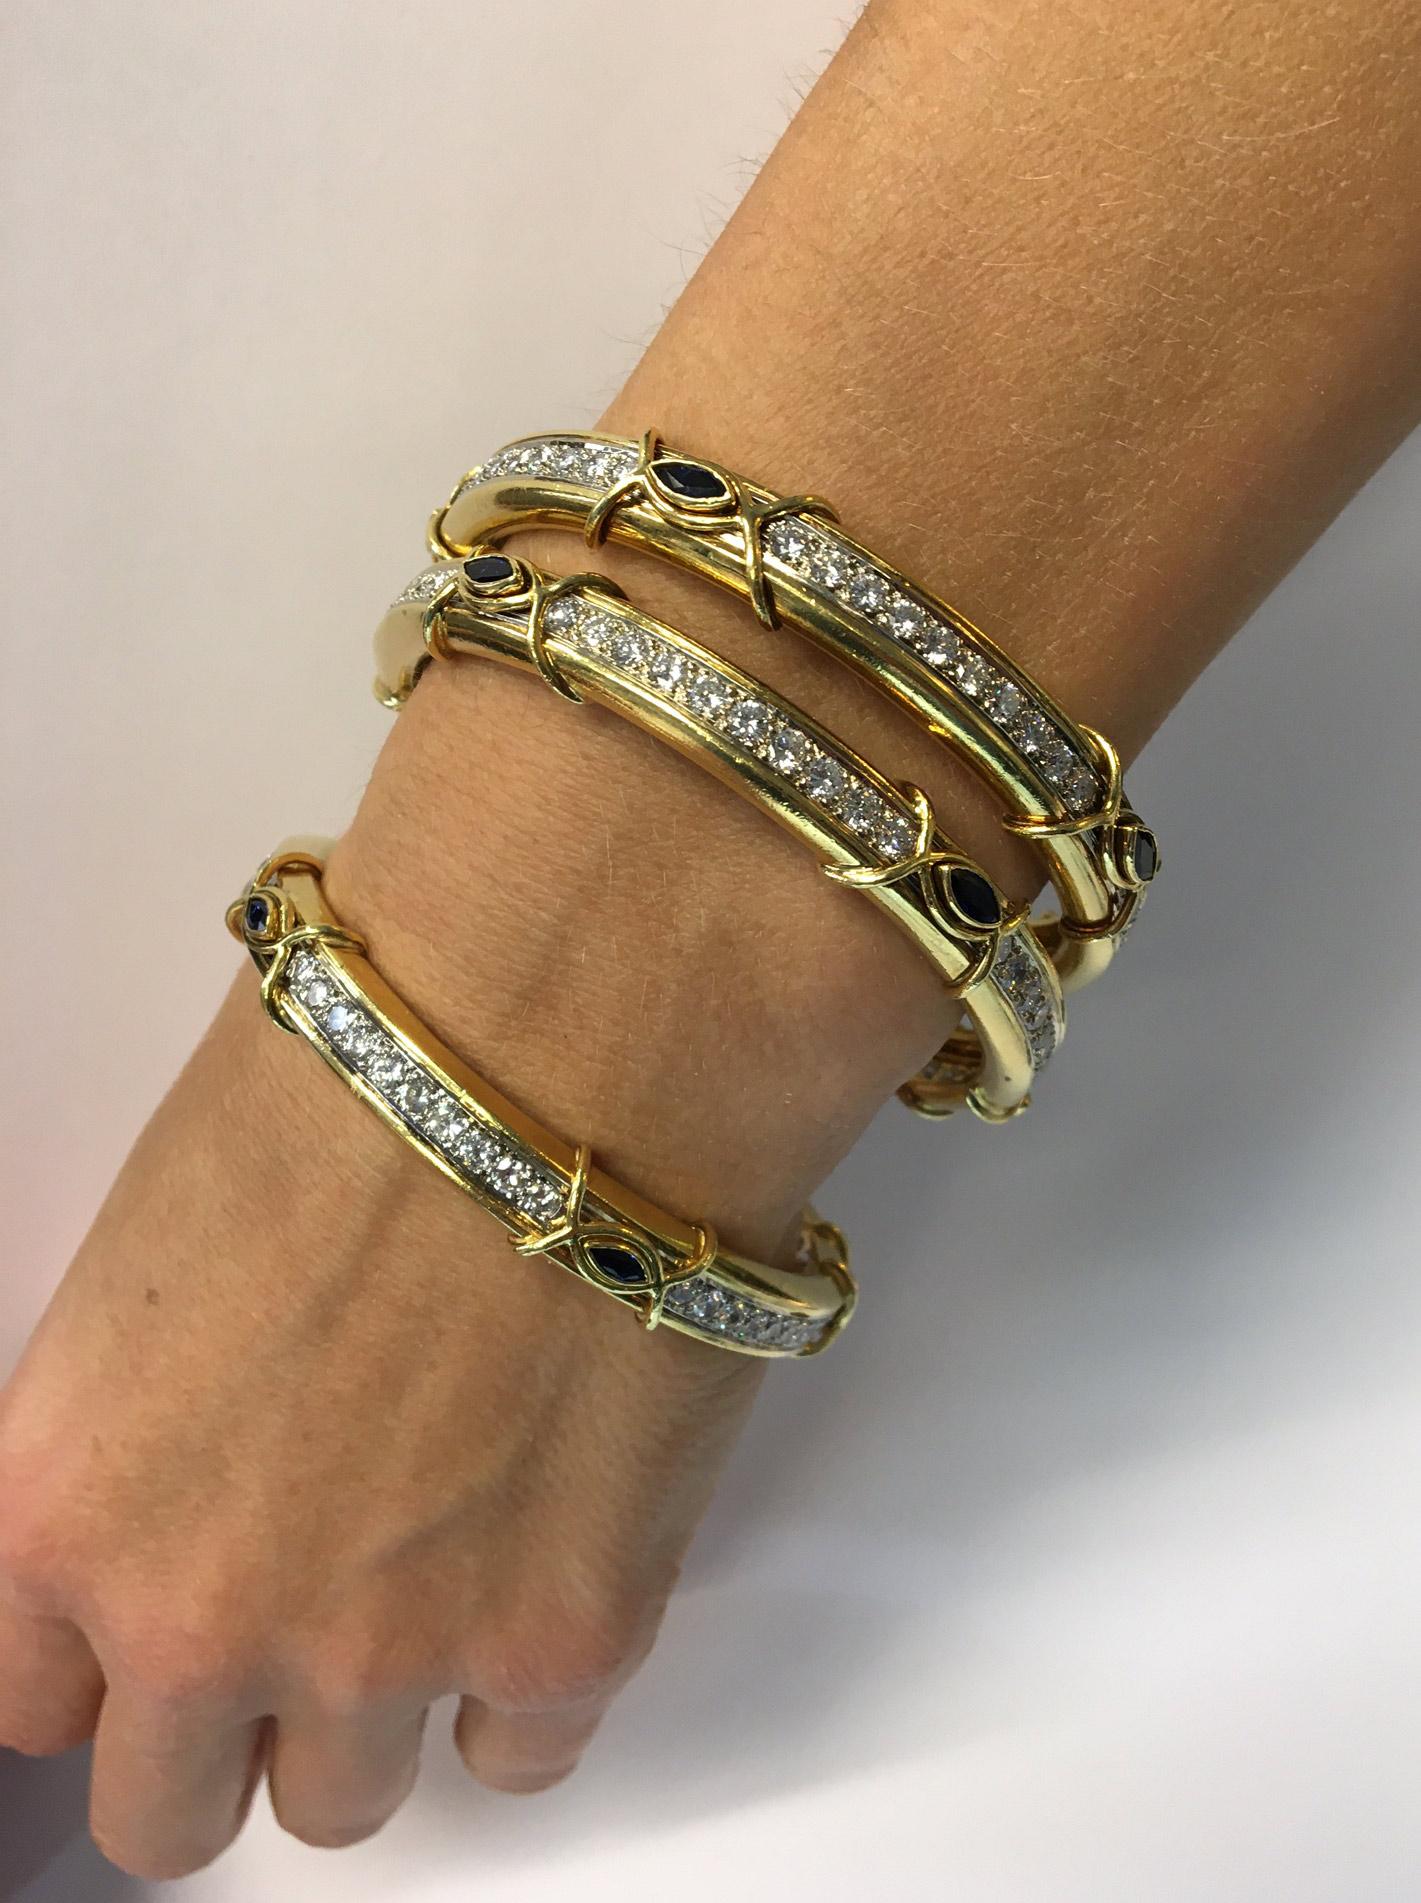 Boris Lebeau Set of 3 Diamond Sapphire 18 Karat Gold Bangle Bracelets In Excellent Condition For Sale In New York, NY